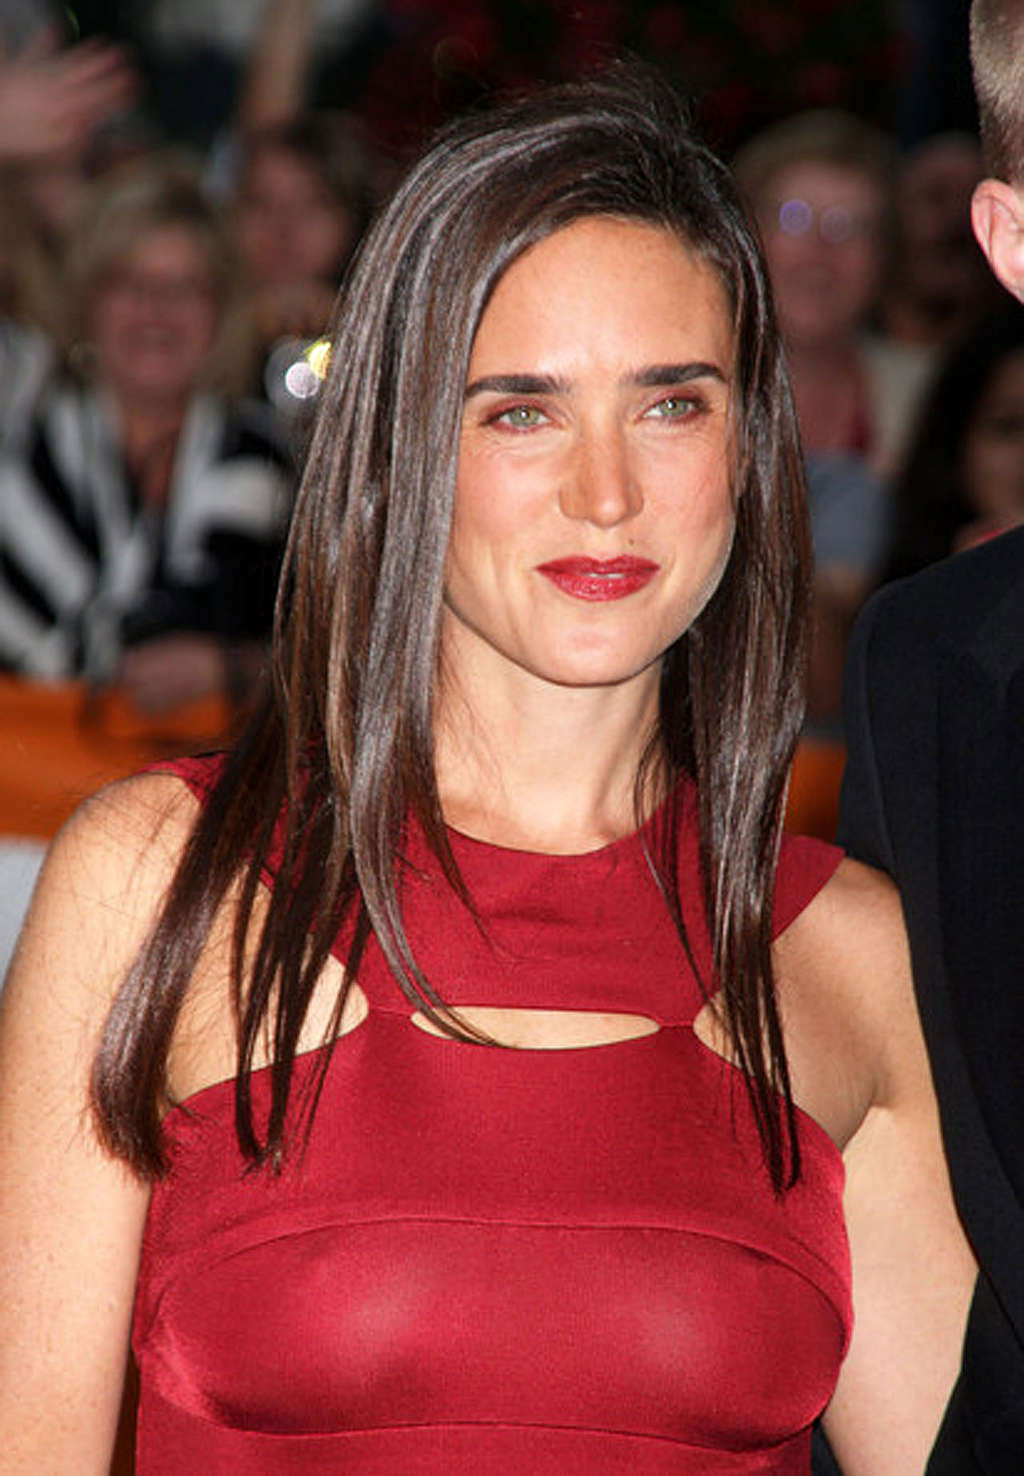 Jennifer Connelly showing her extremely huge boobs and sexy body #75363278